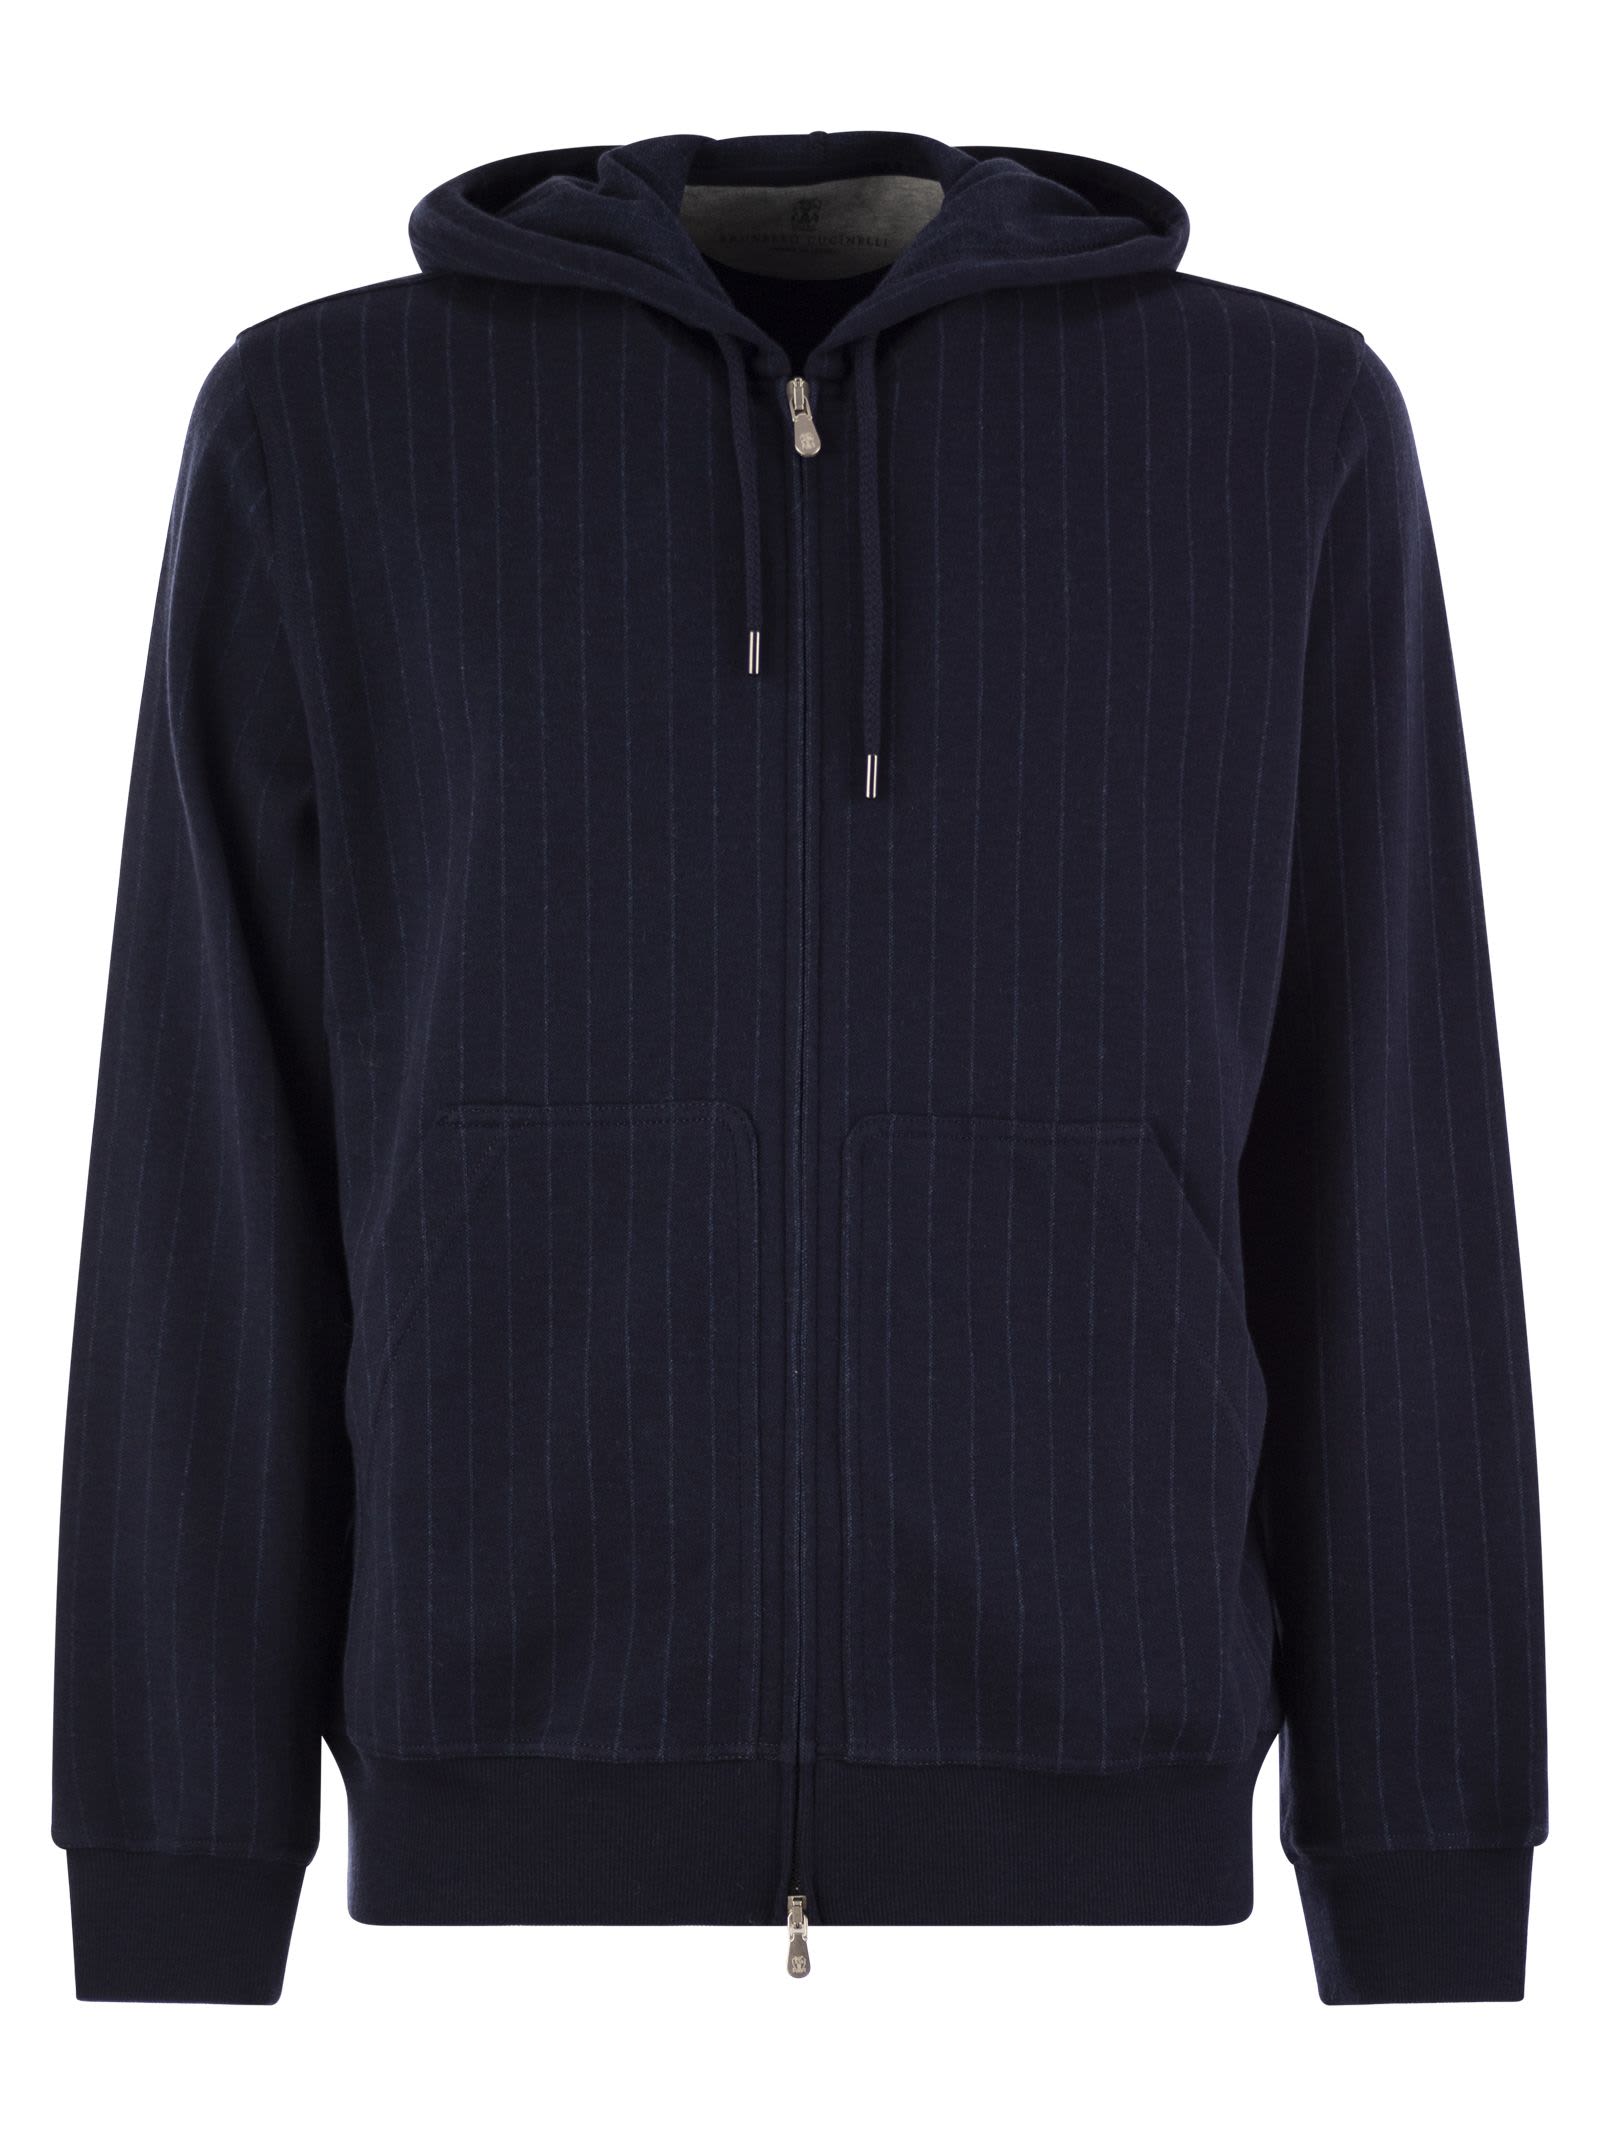 Double Pinstripe Fleece Topwear In Cotton, Cashmere And Silk With Zip And Hood